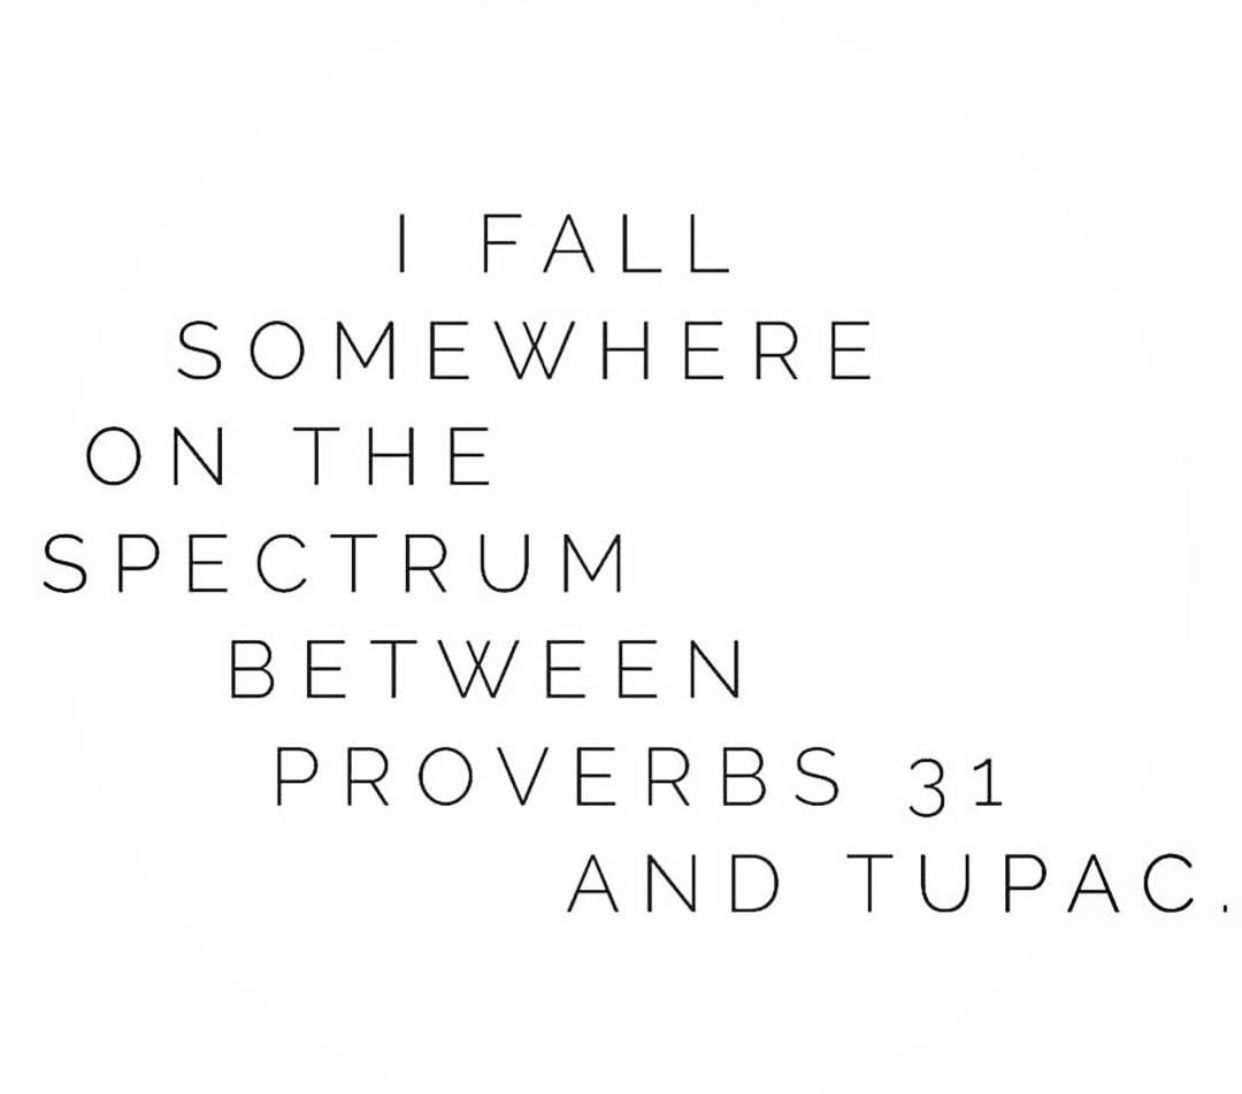 I fall somewhere on the spectrum between Proverbs 31 and Tupac.